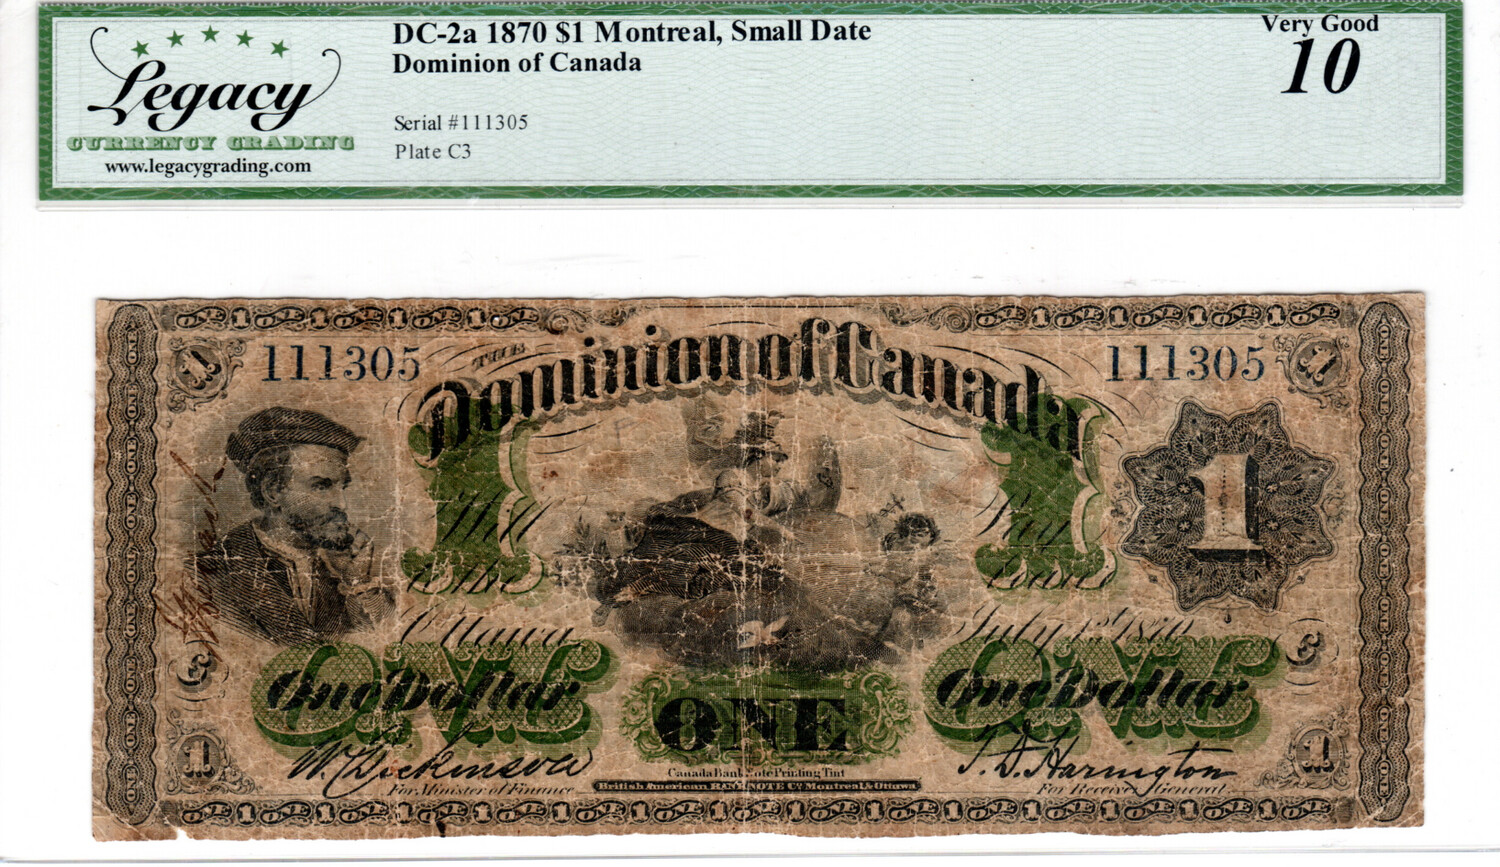 CANADA (Dominion of Canada) Montreal Small Date $1 Dollar 1870 Very Good Legacy Currency Grading 10 Charlton DC-2a Paper Money